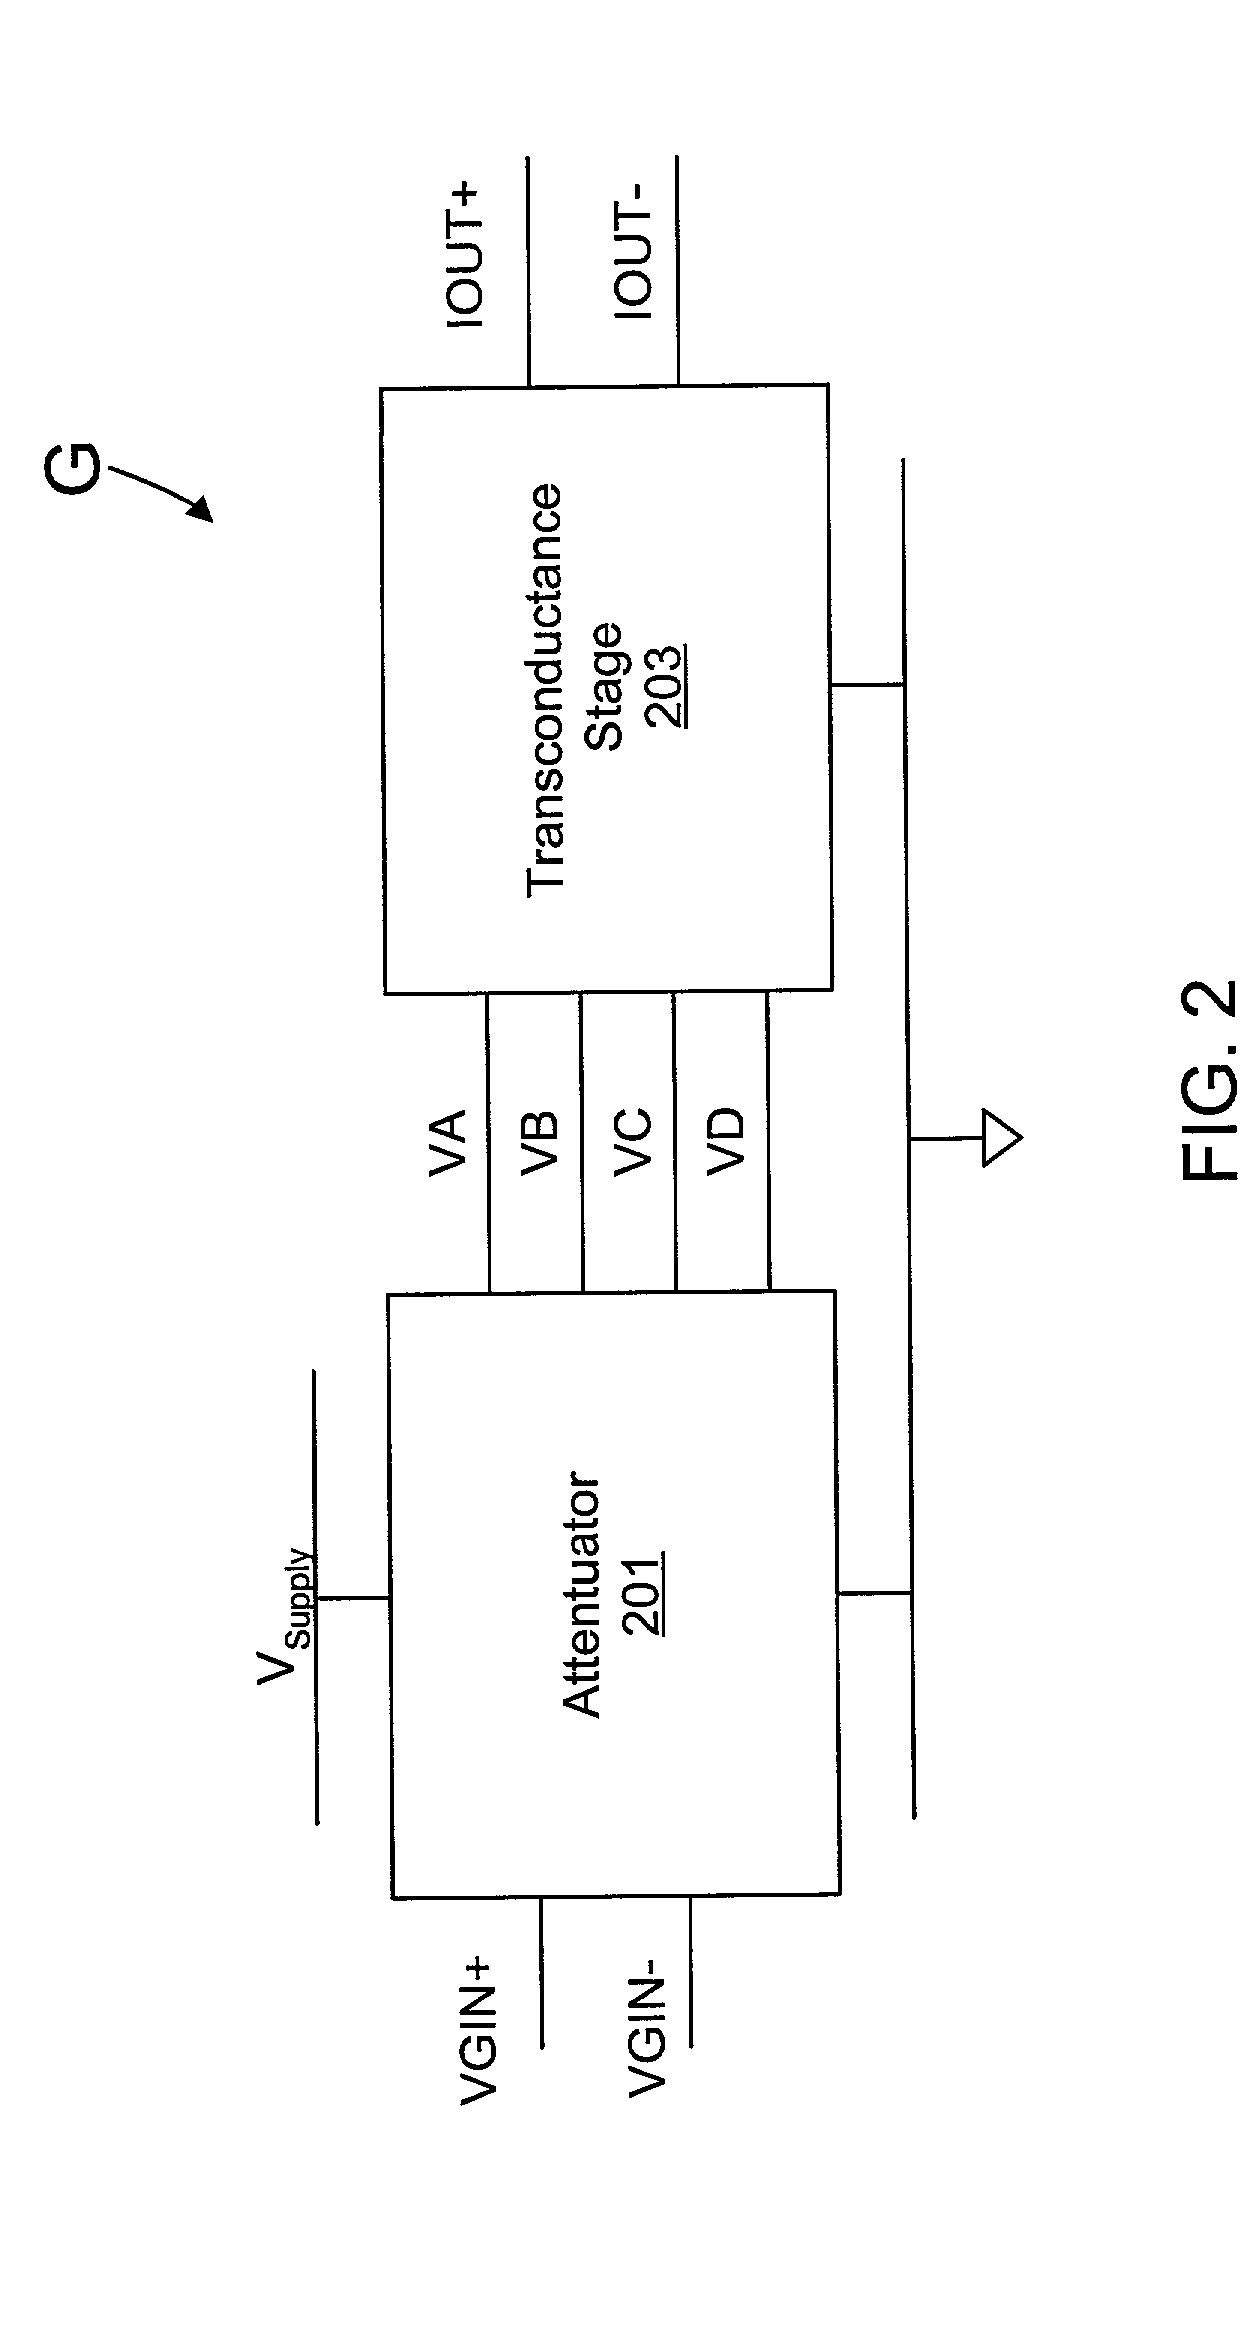 Automatic gain control circuit with high linearity and monotonically correlated offset voltage